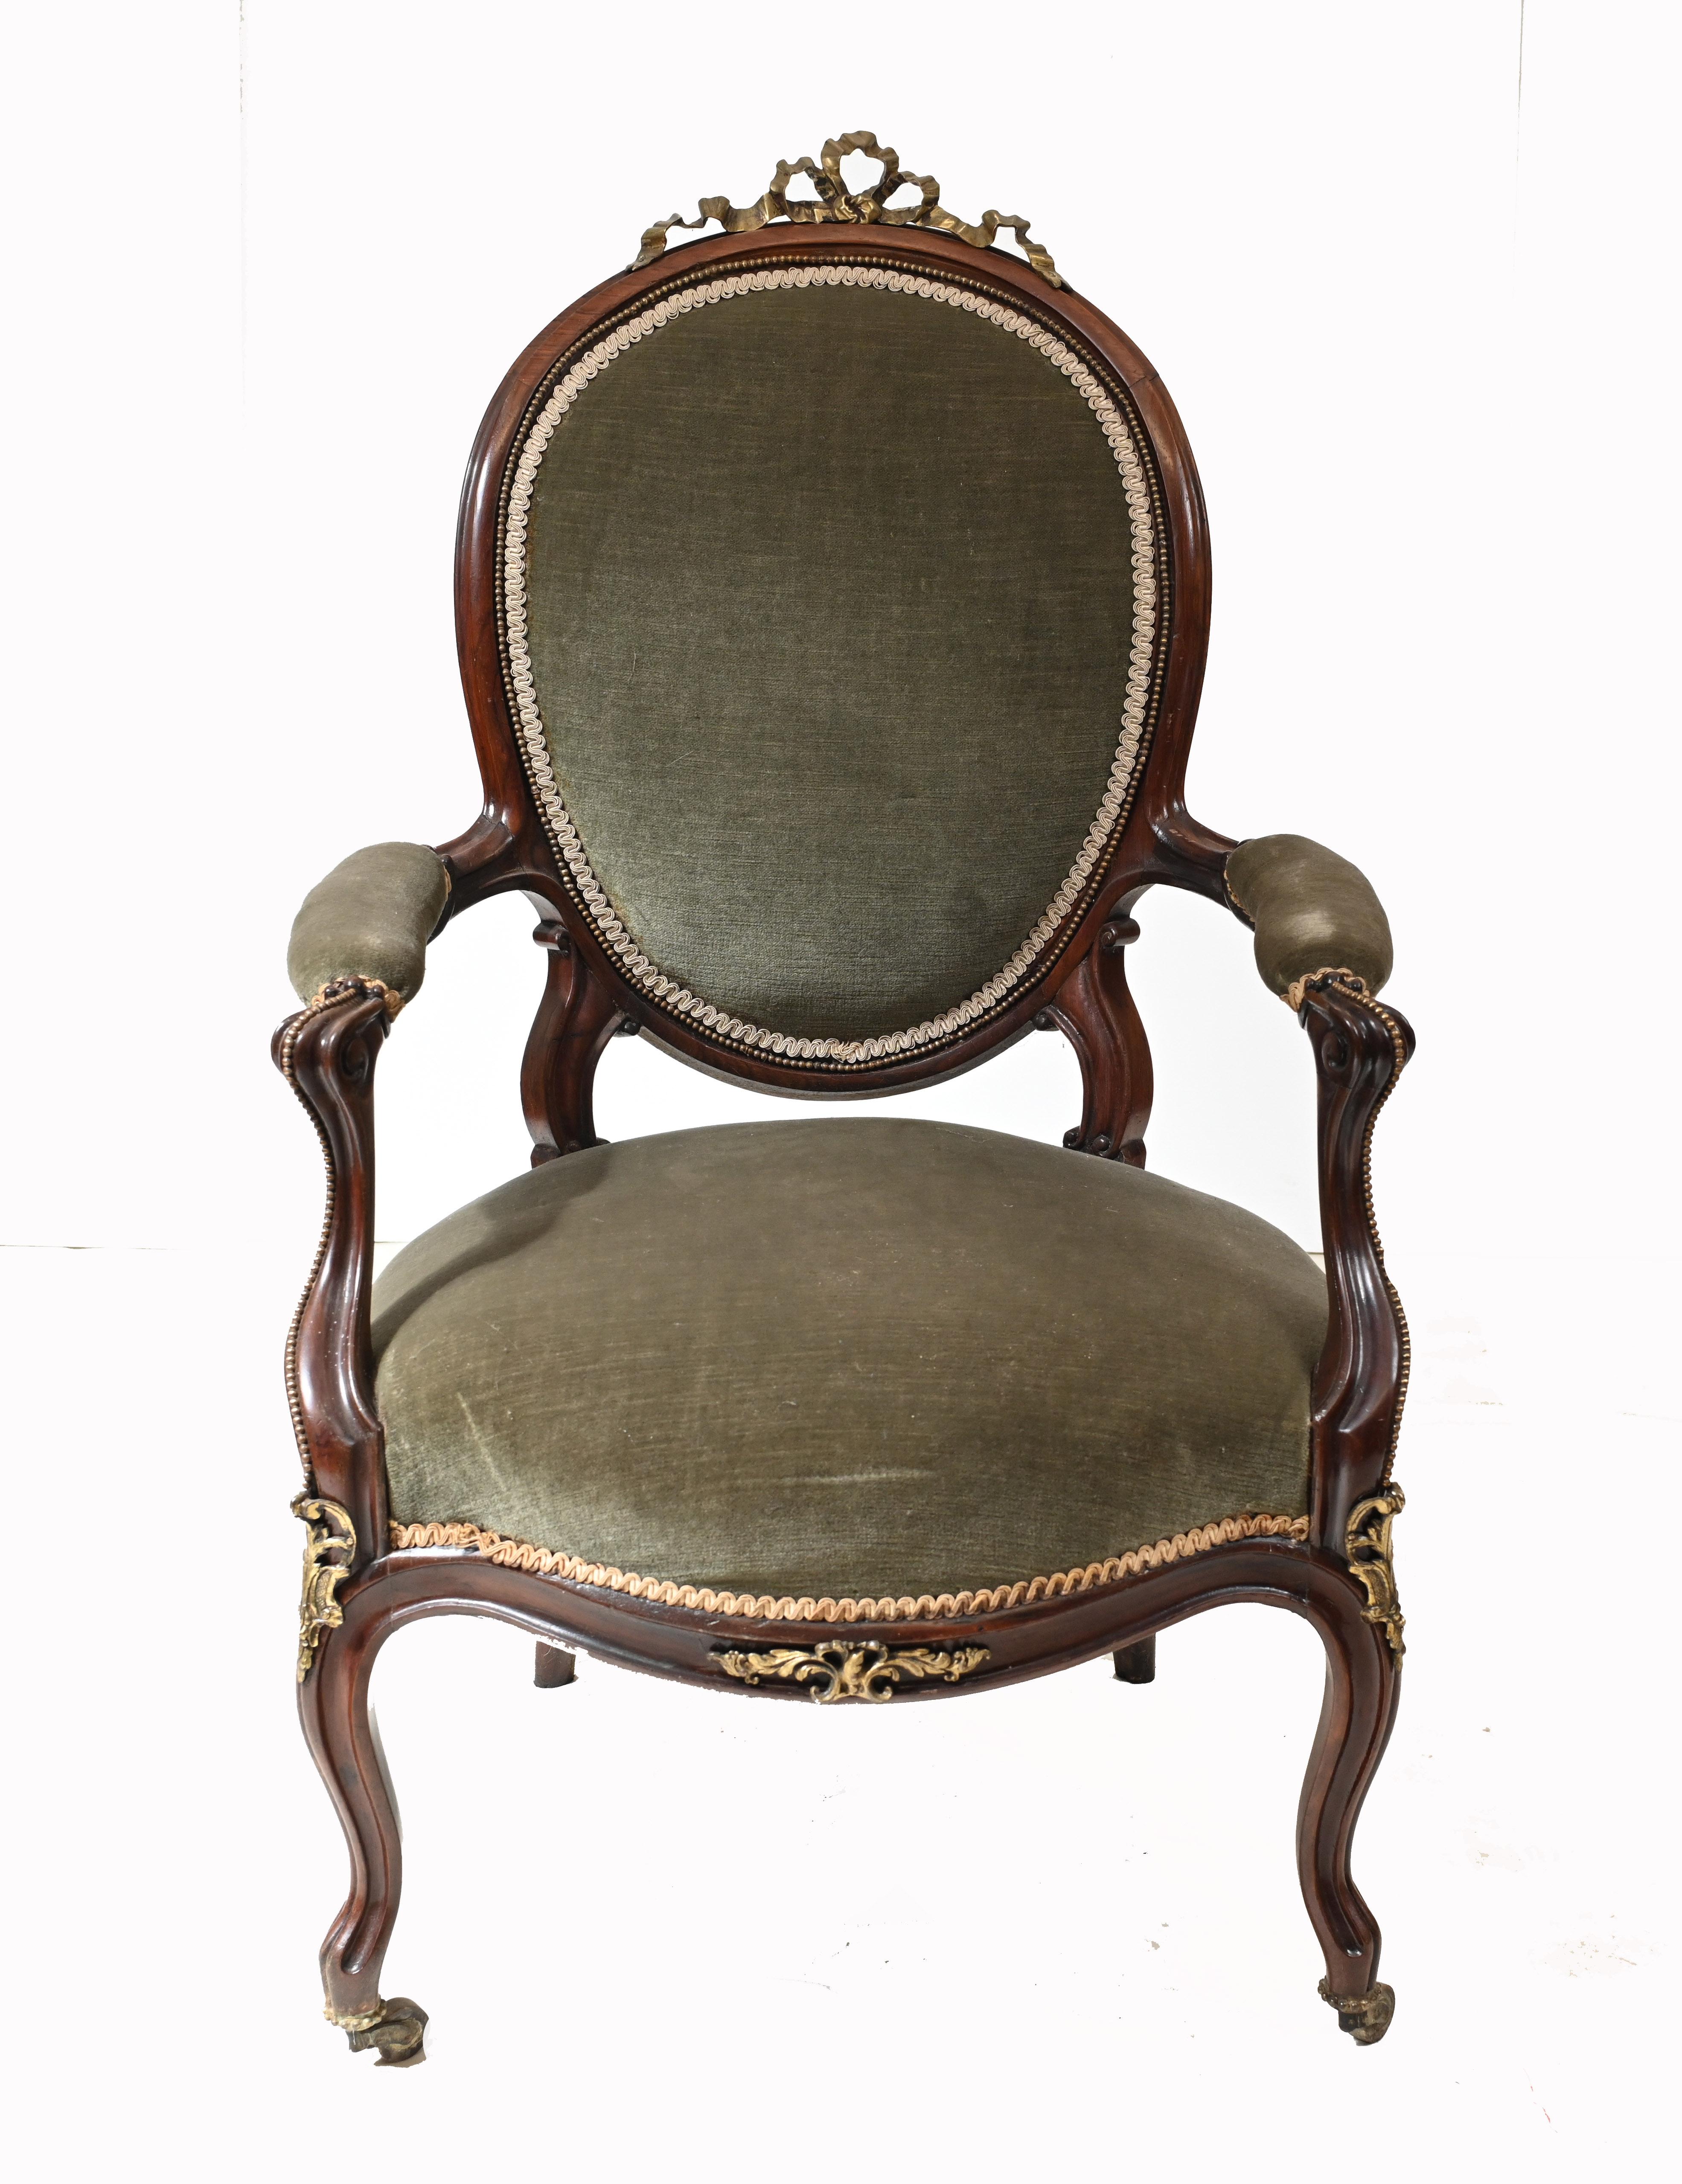 Gorgeous pair of Victorian salon chairs with original ormolu mounts
Very comfortable with cushioned arm rests
We date this handsome pair to circa 1870
Offered in great shape ready for home use right away
We ship to every corner of the planet
We